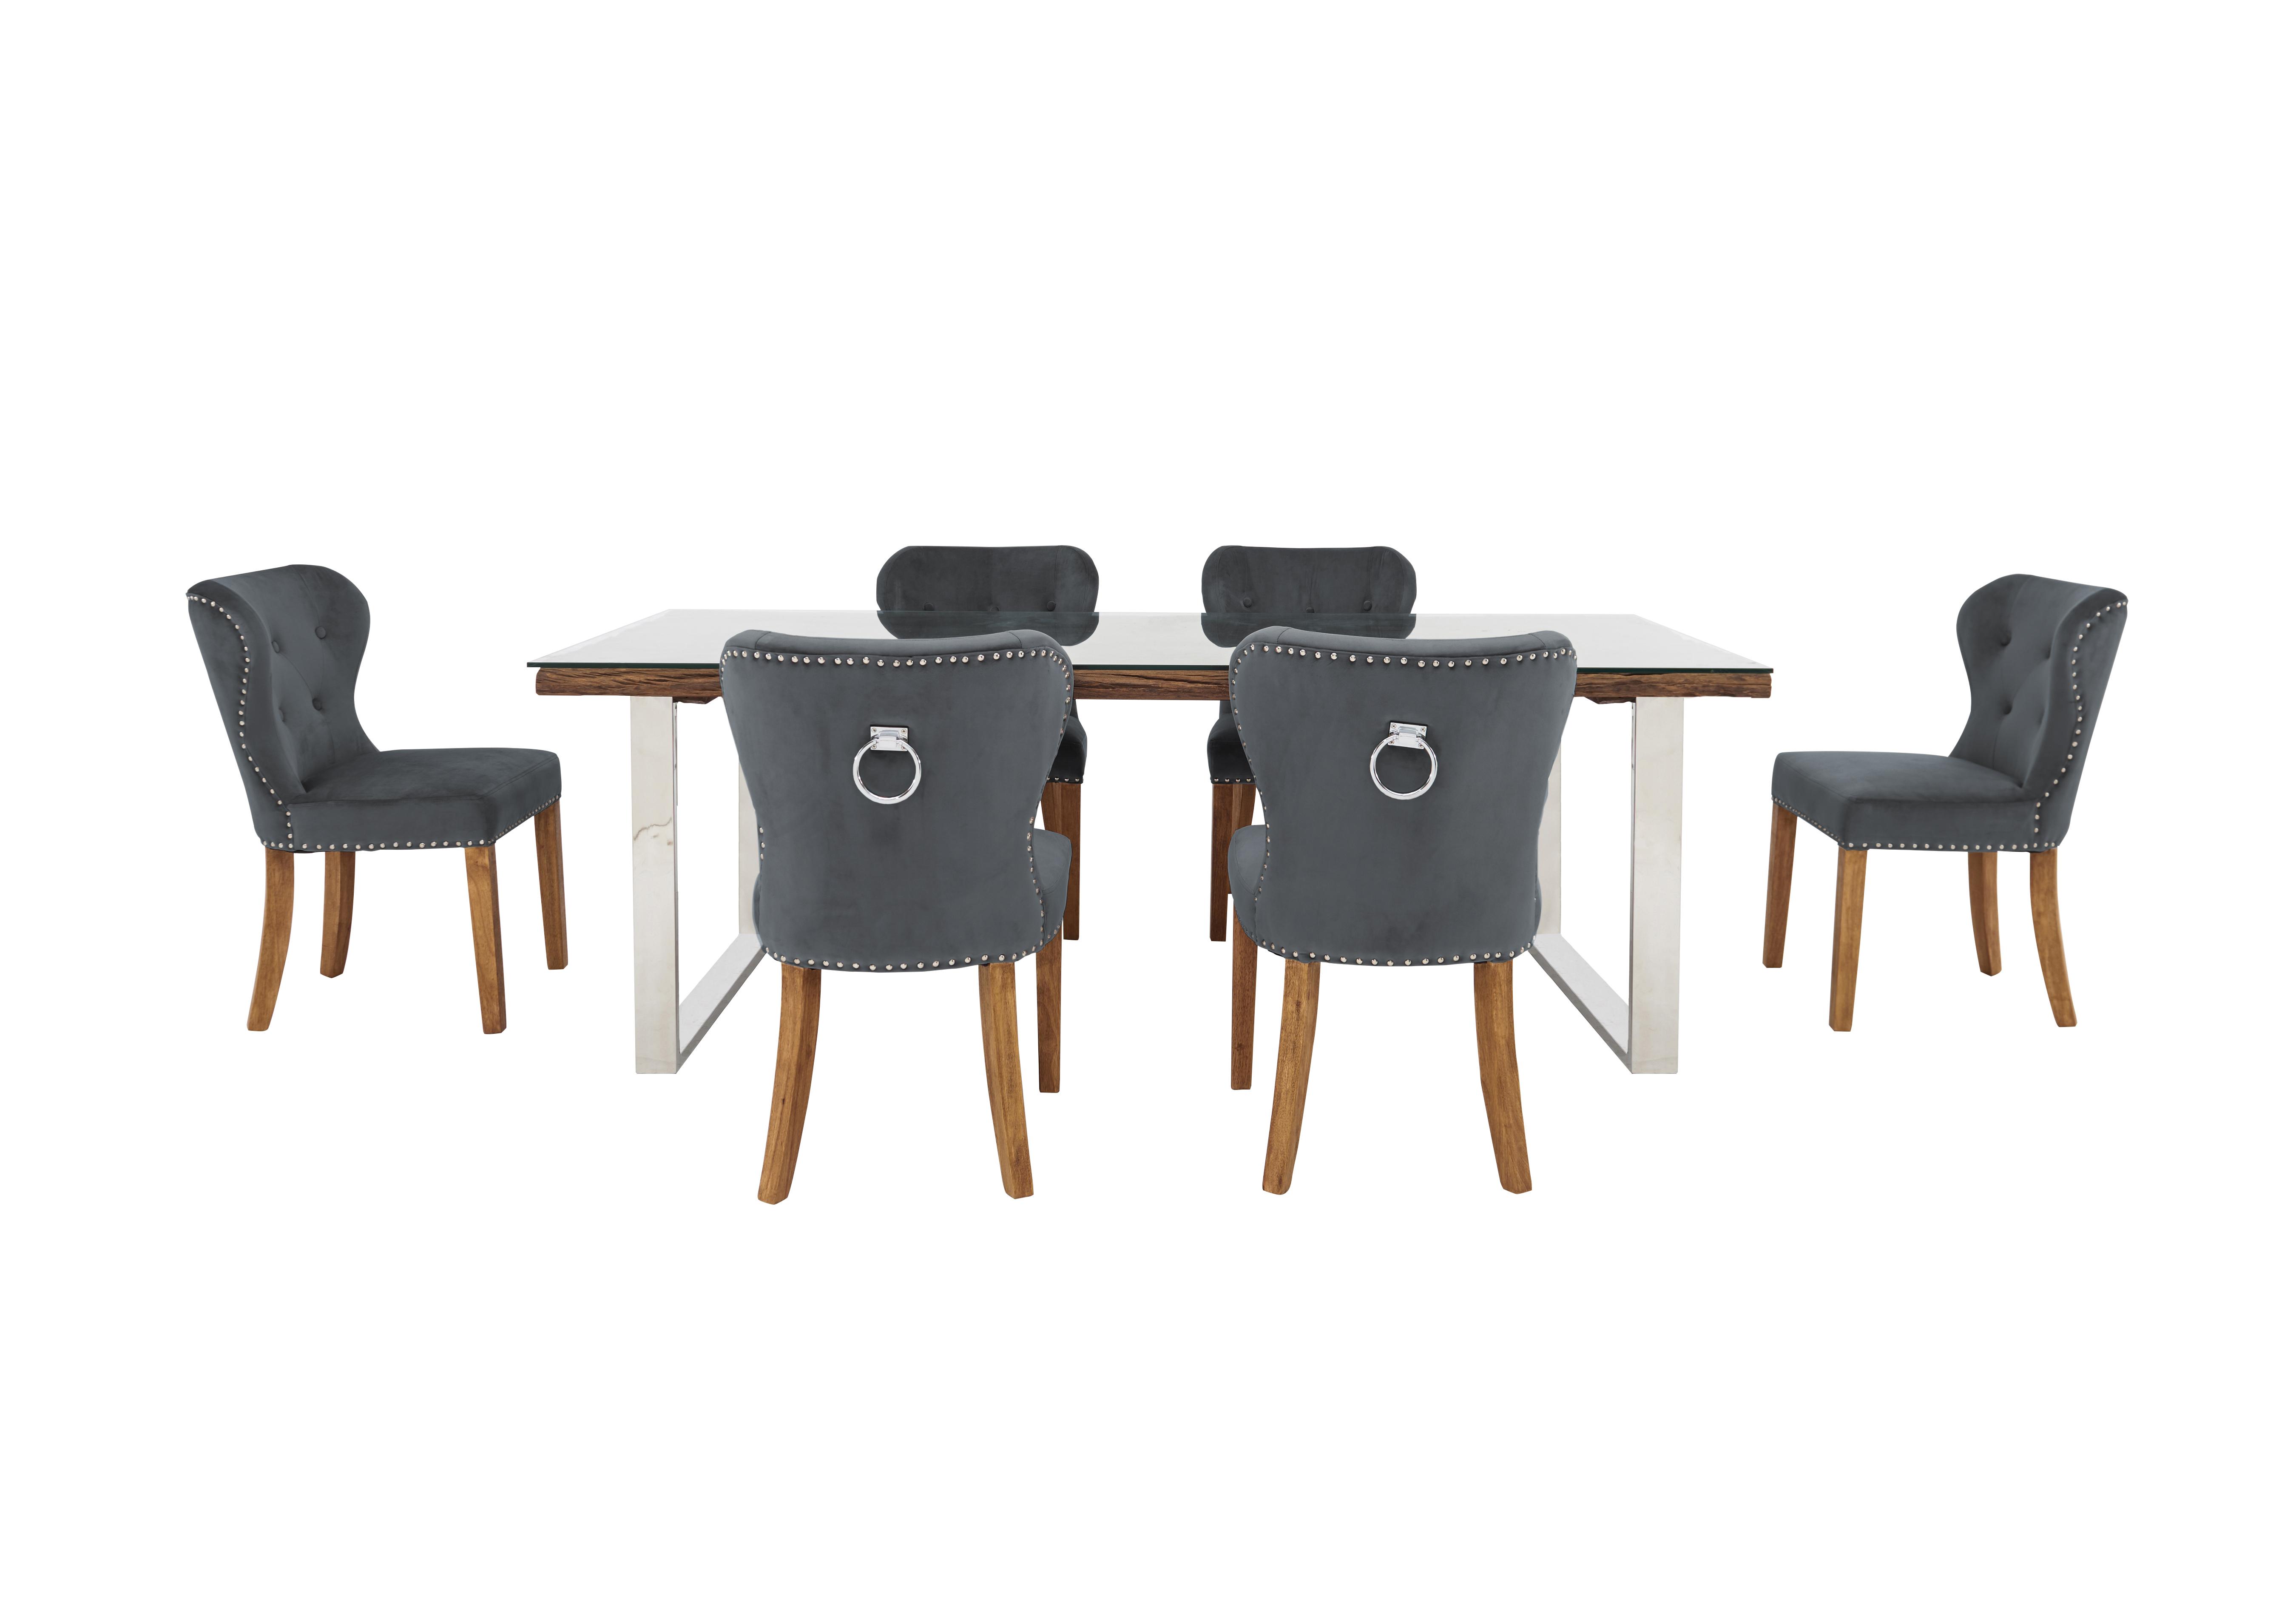 Chennai Dining Table with U-Shaped Legs and 6 Upholstered Chairs in Grey Chairs on Furniture Village